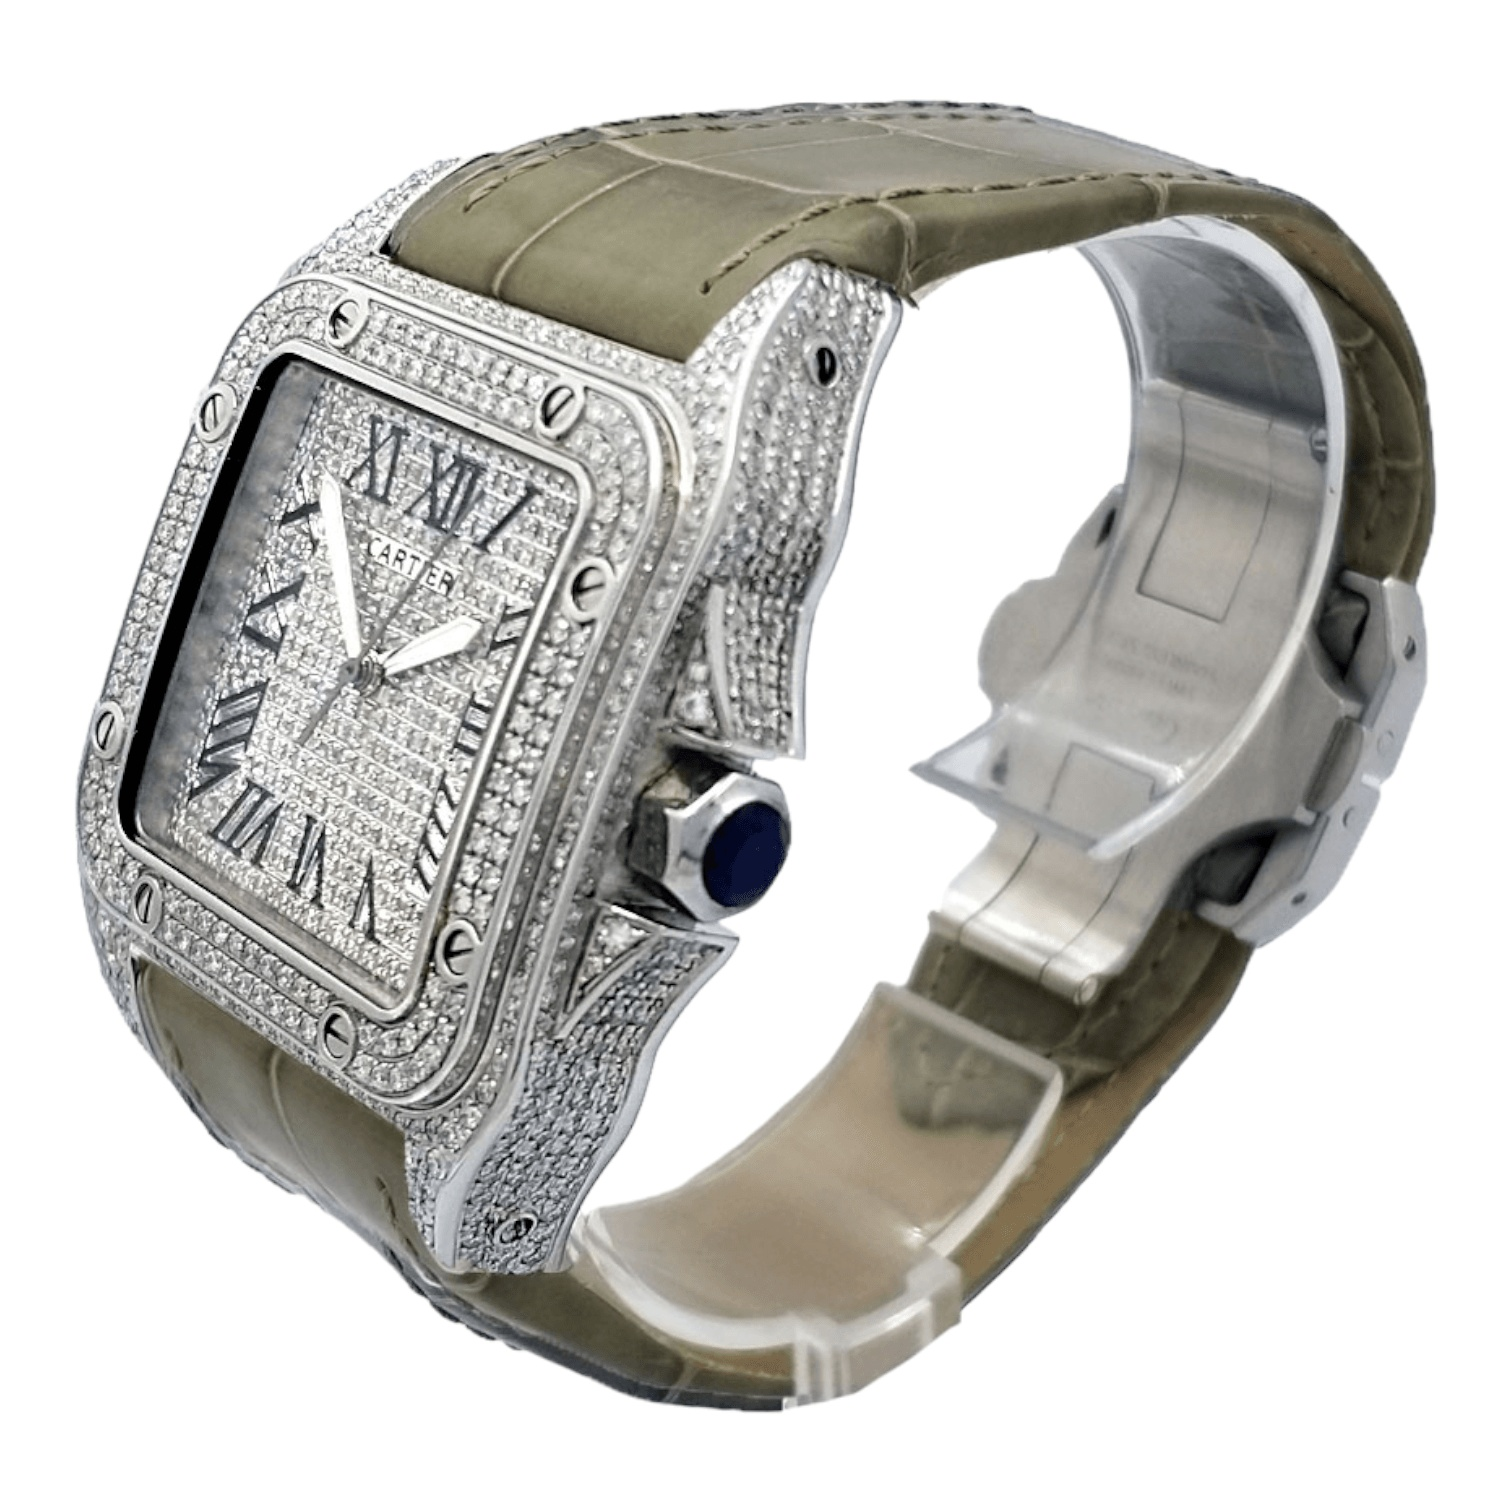 Cartier Santos 100 XL Iced Out diamonds setting Ref. 2656 - OU680 - LuxuryInStock